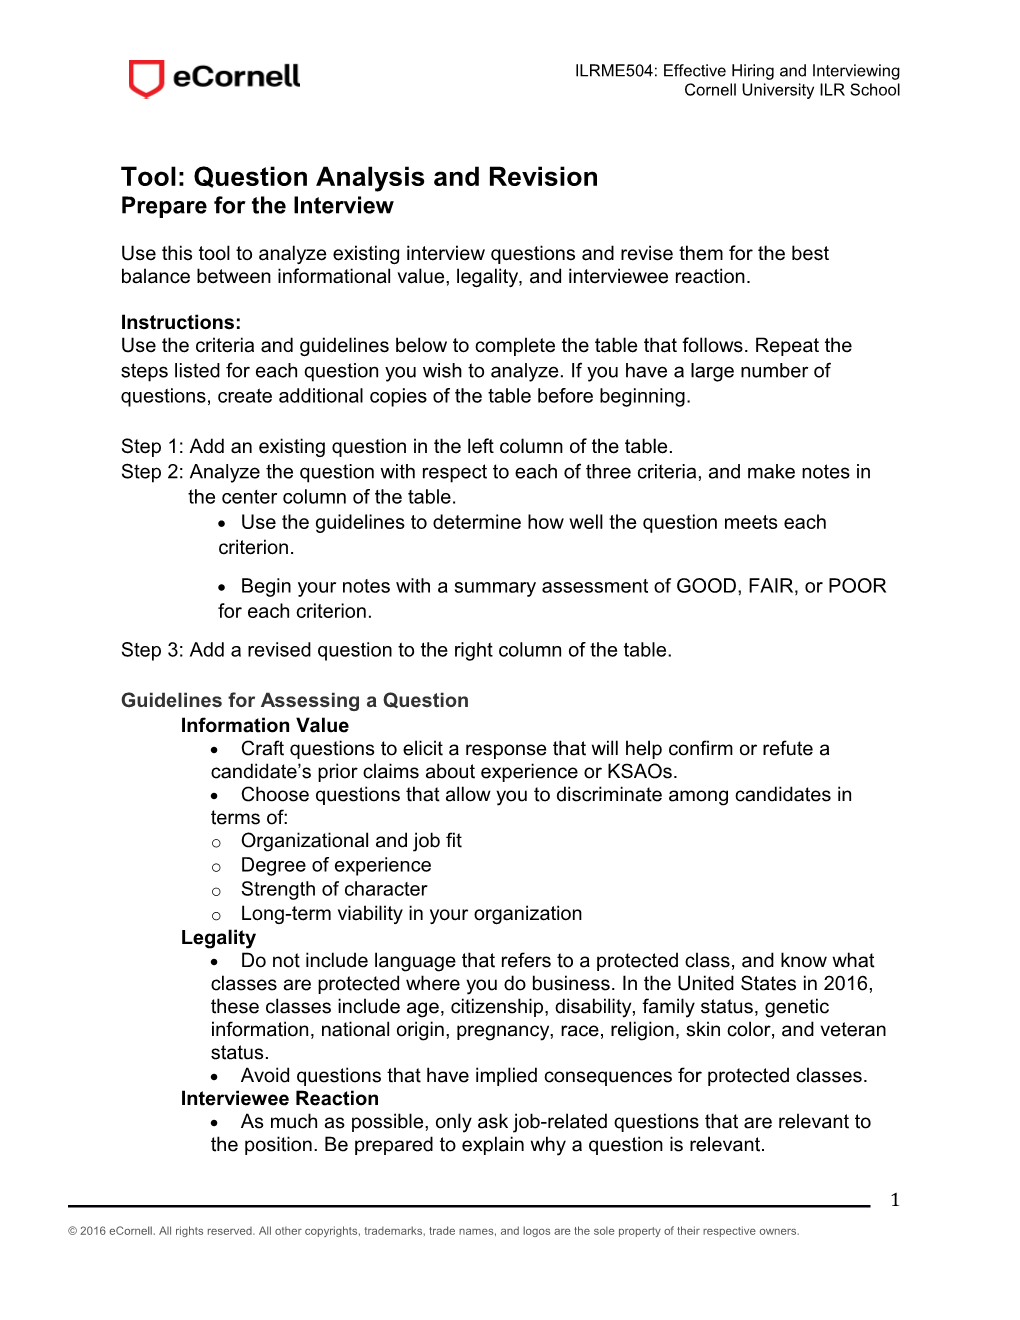 Tool: Question Analysis and Revision